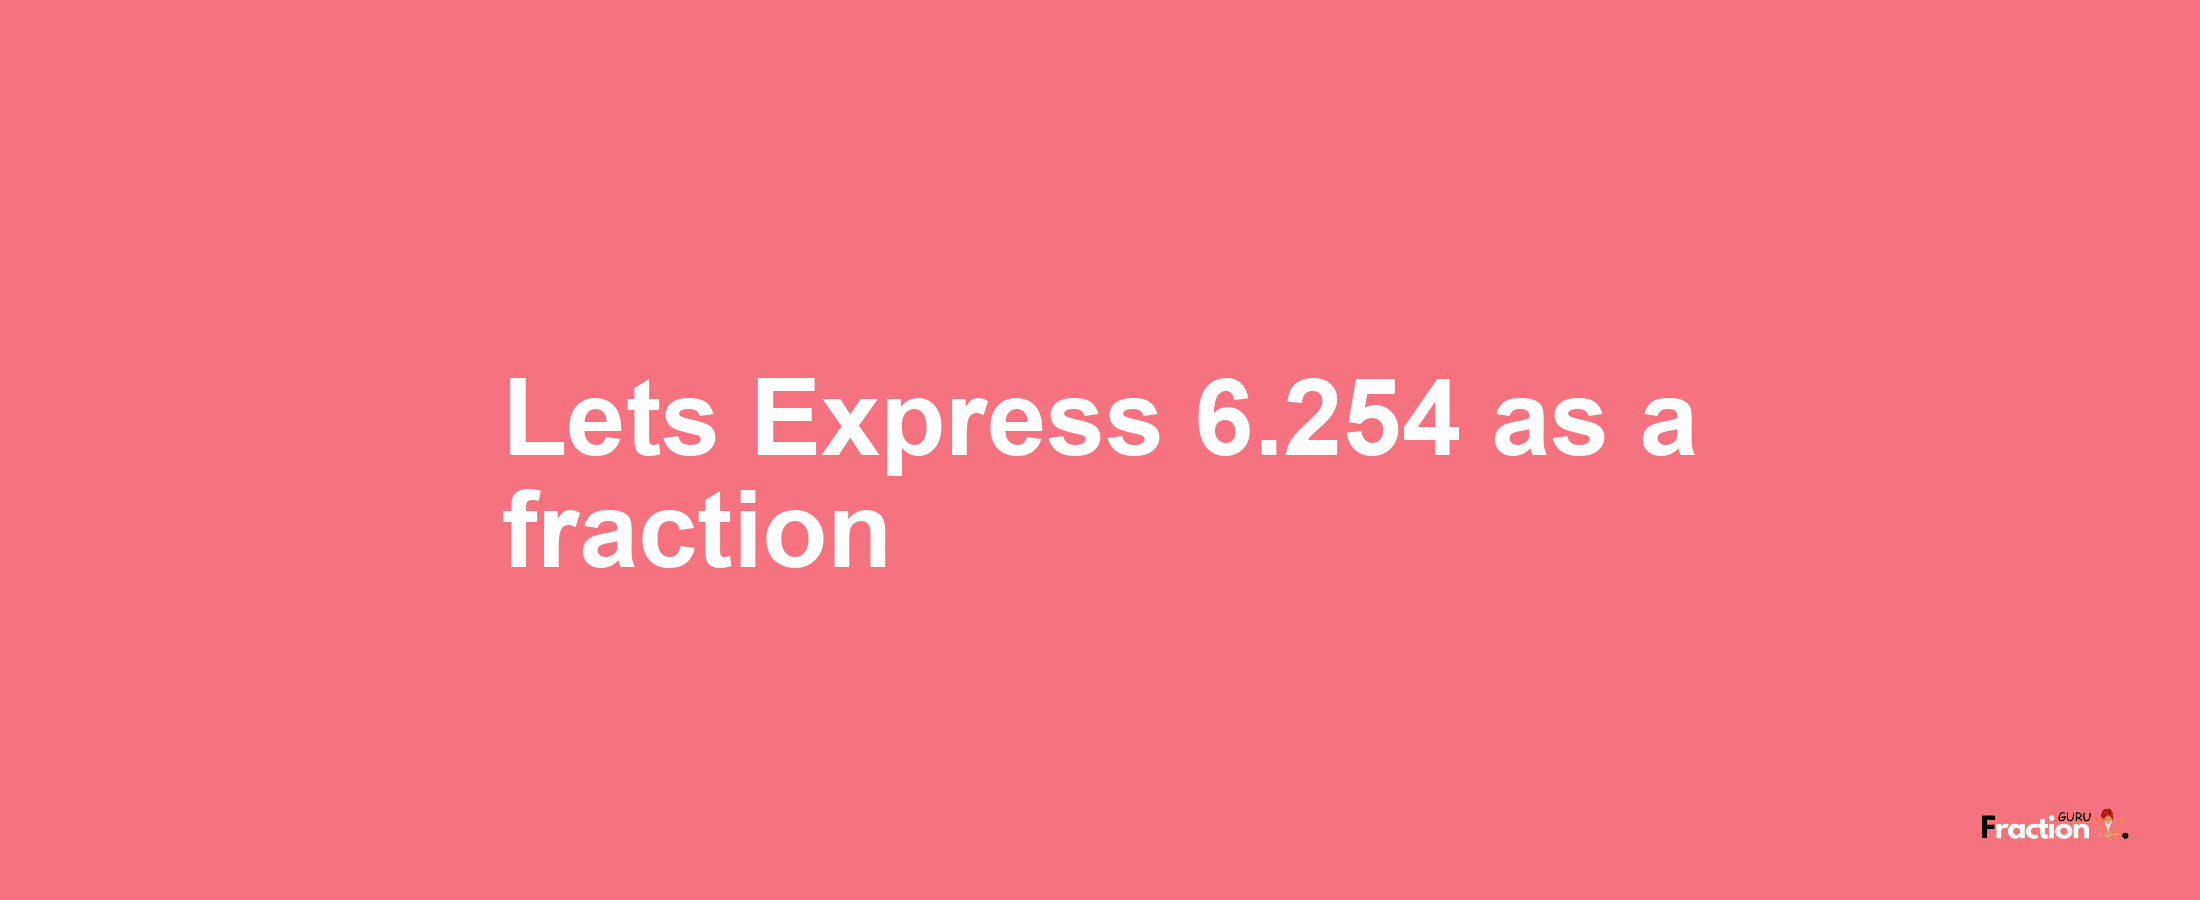 Lets Express 6.254 as afraction